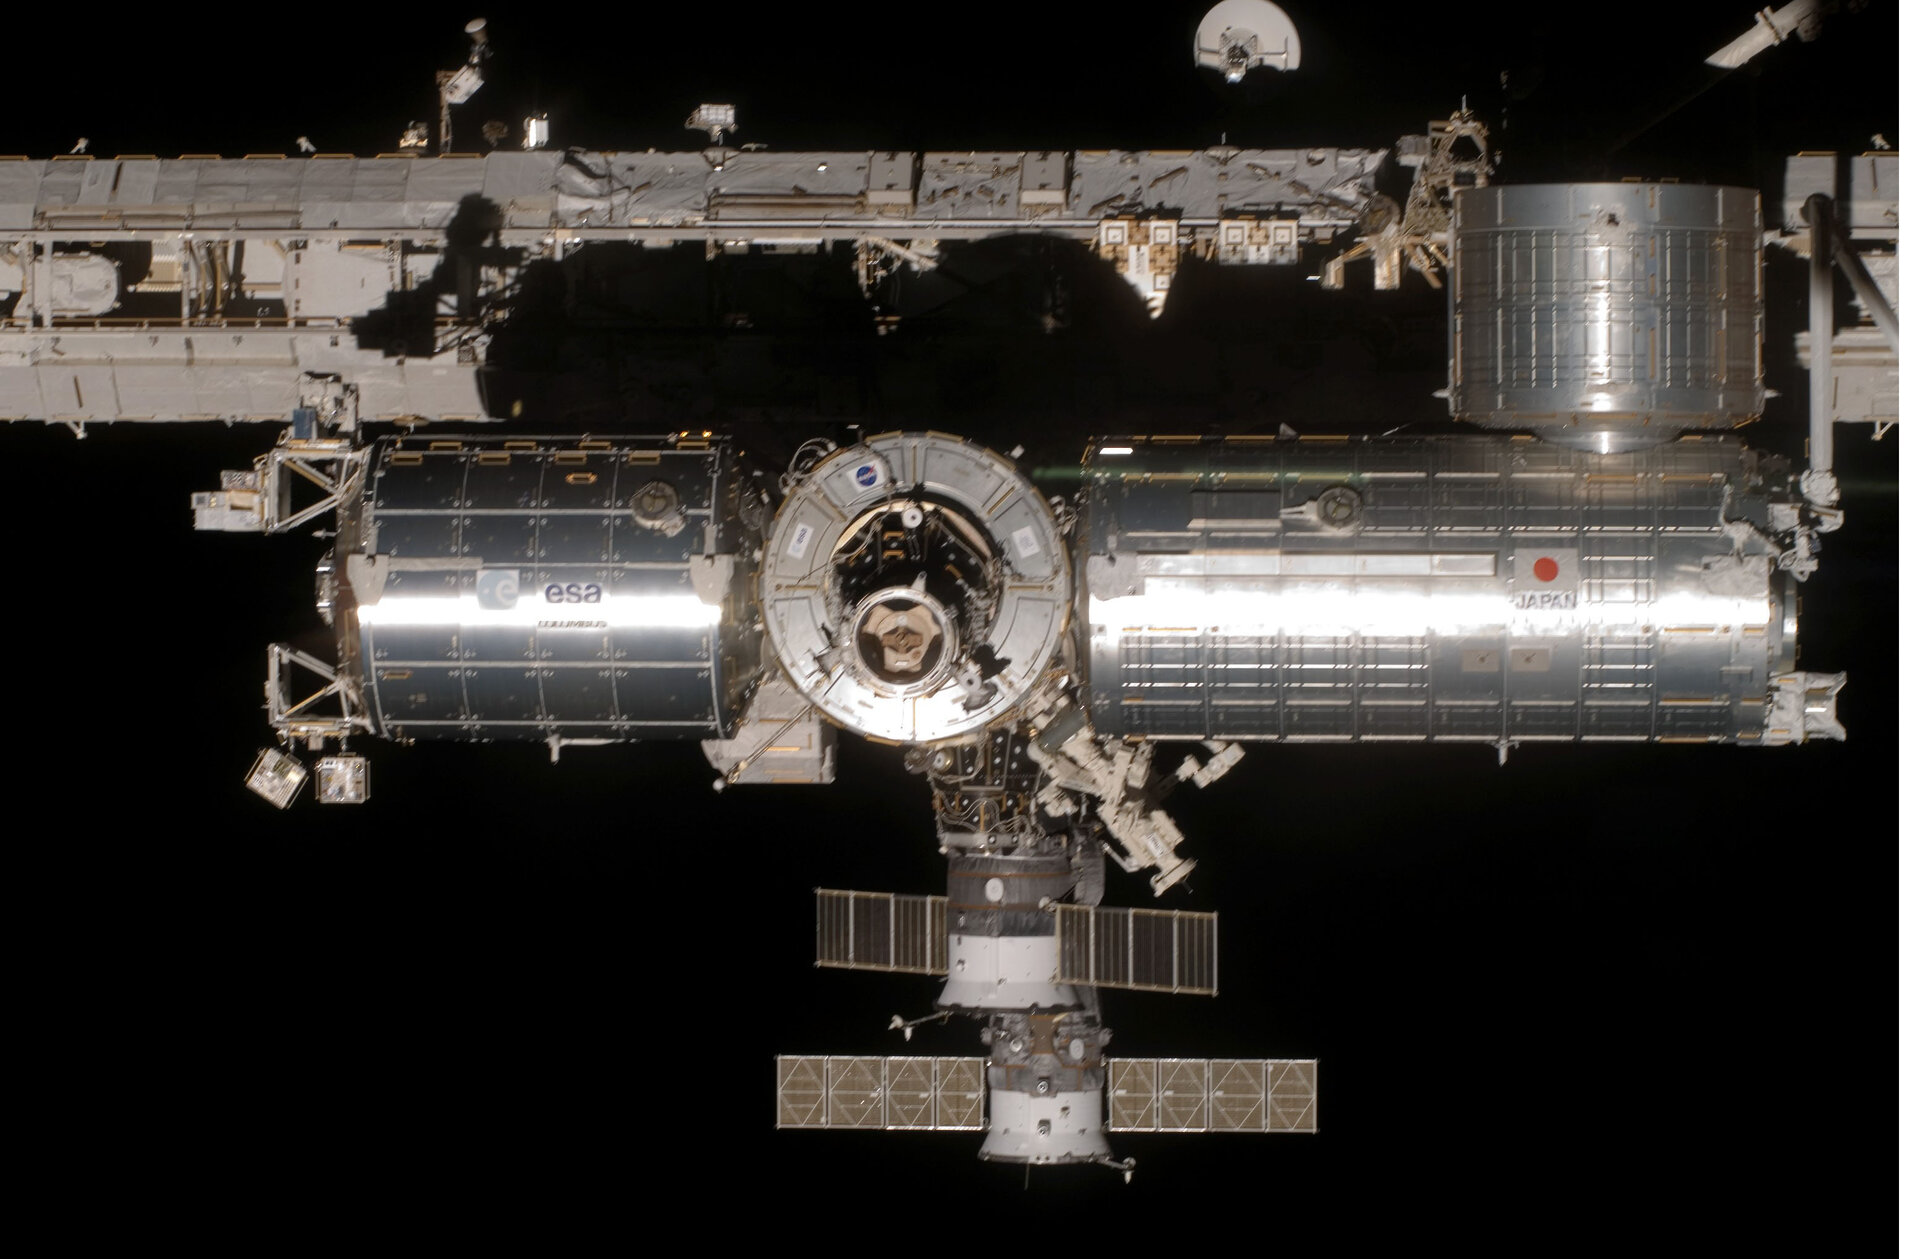 ESA's Columbus laboratory, Node-2 and Japan's Kibo module at the ISS (main truss at rear, two Soyuz vehicles lower centre)